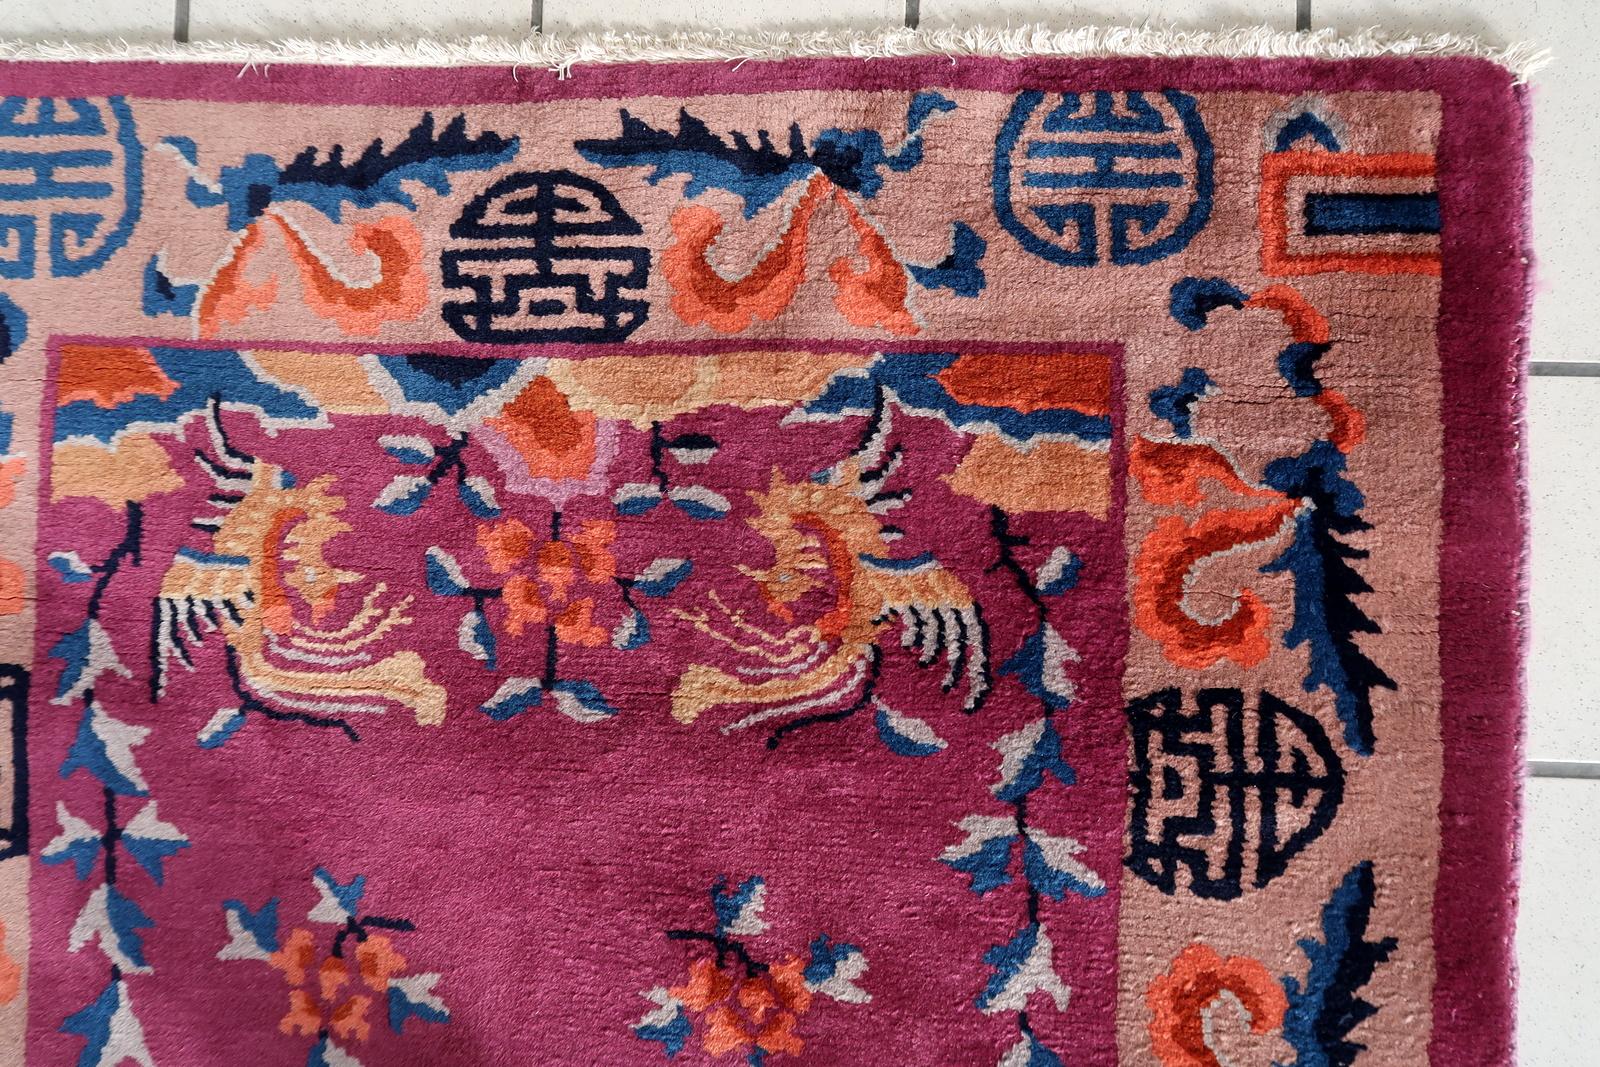 Handmade Antique Art Deco Chinese Rug from the 1920s:

Dimensions:
Size: 3.1’ x 4.5’ (95cm x 138cm)
Shape: Rectangular
Material and Condition:
Crafted from wool, this rug exudes both elegance and durability.
It is in good condition, a testament to